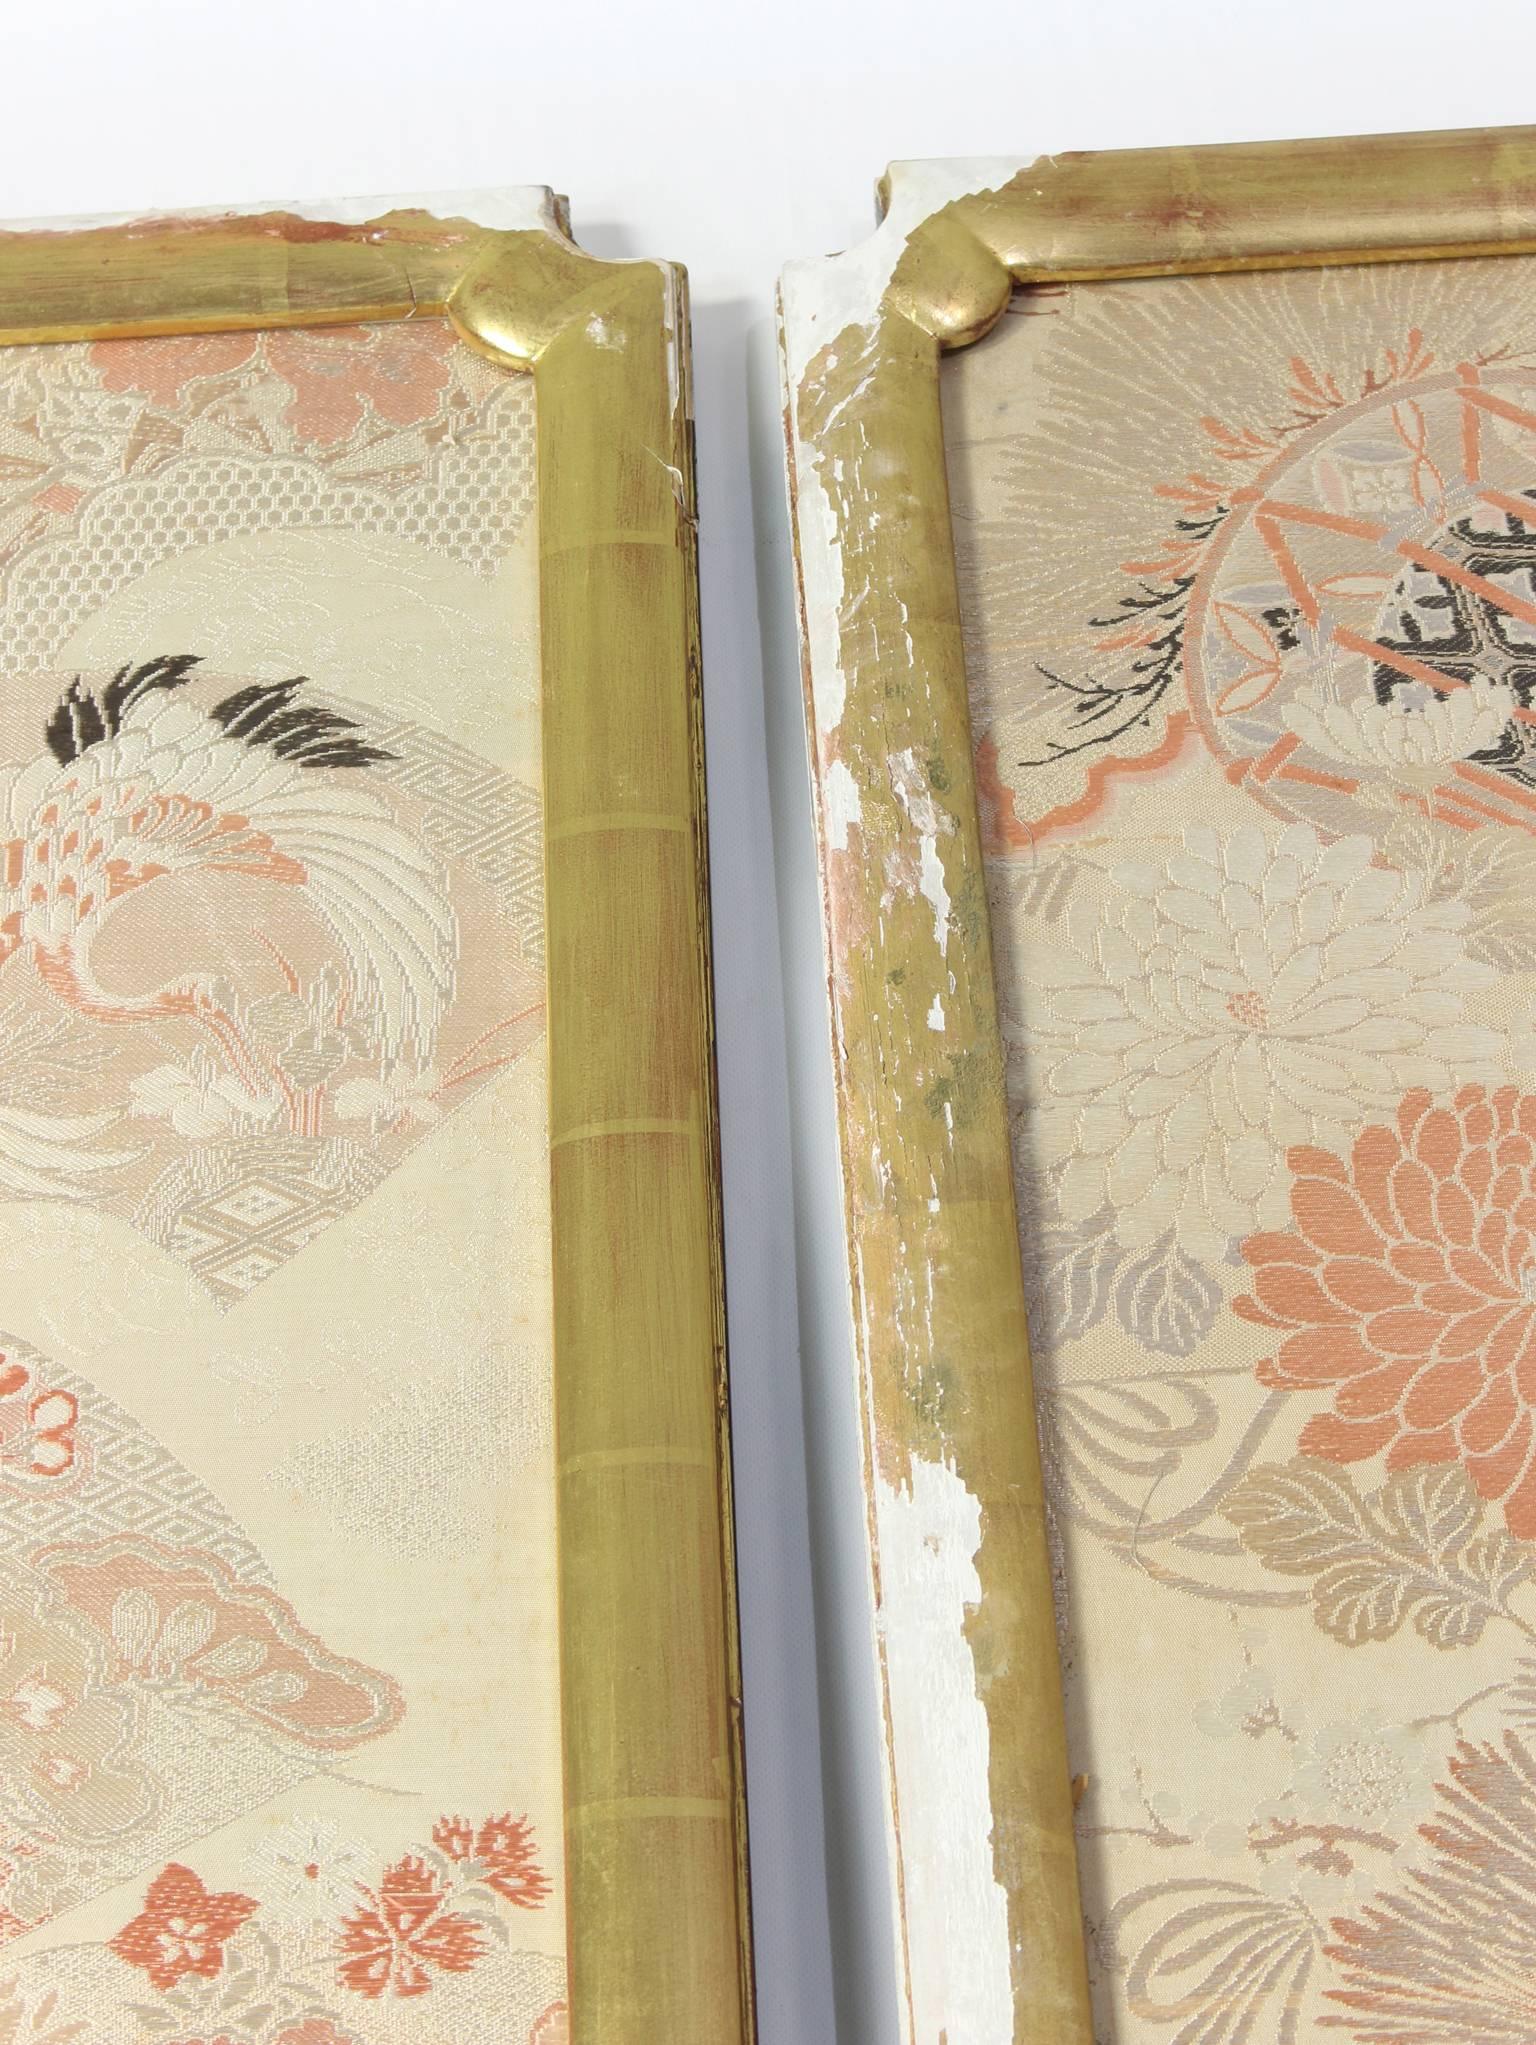 Exceptionally Large Japanese Brocade Silk Panels in Gilt Frames For Sale 5